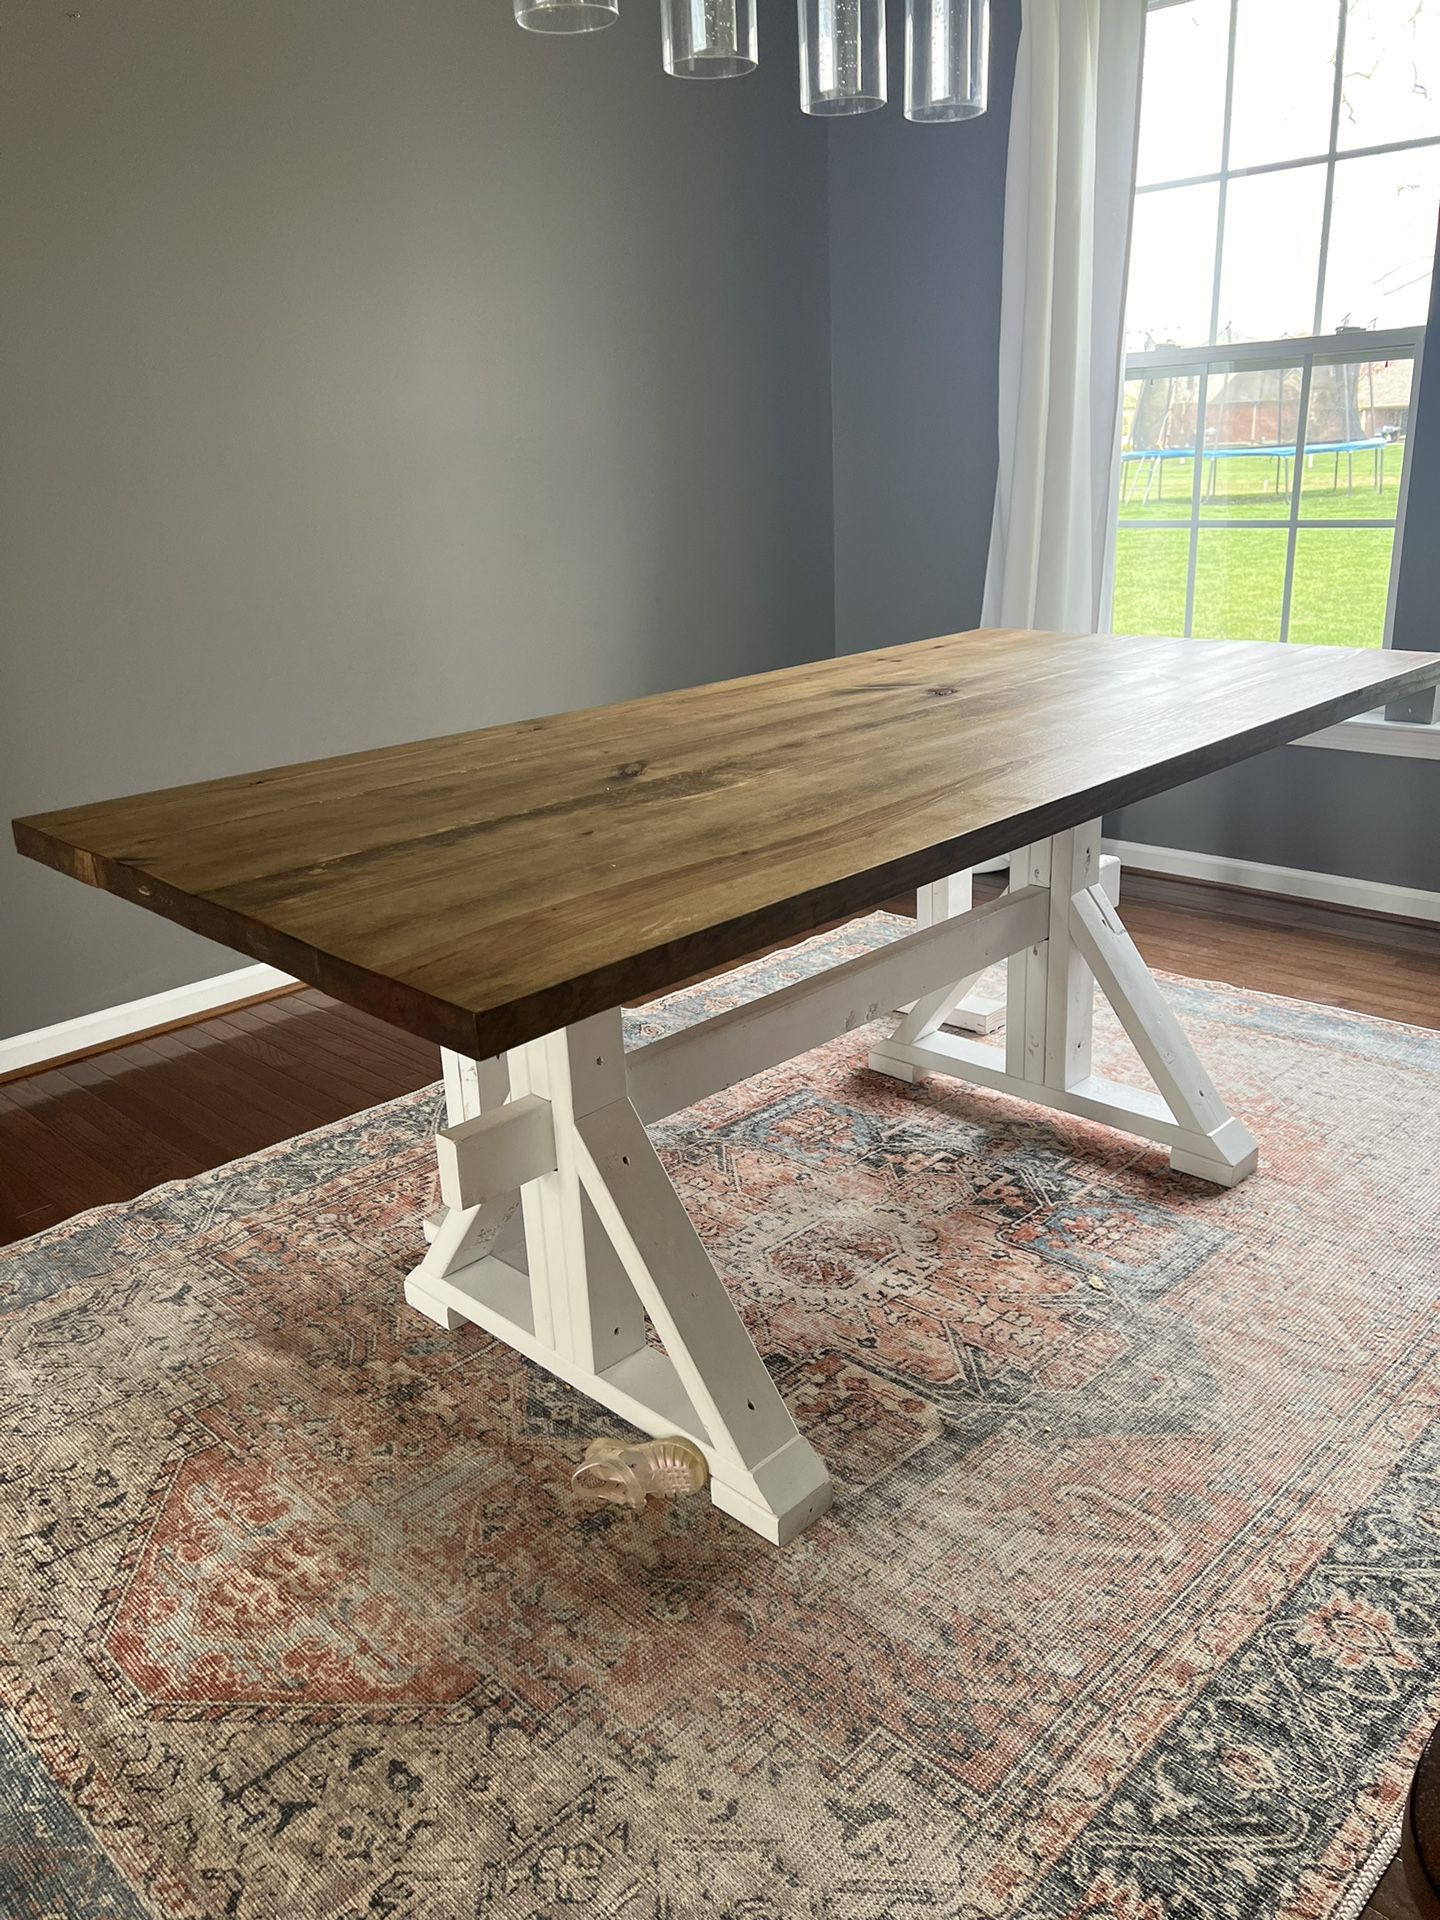 Dining table & bench